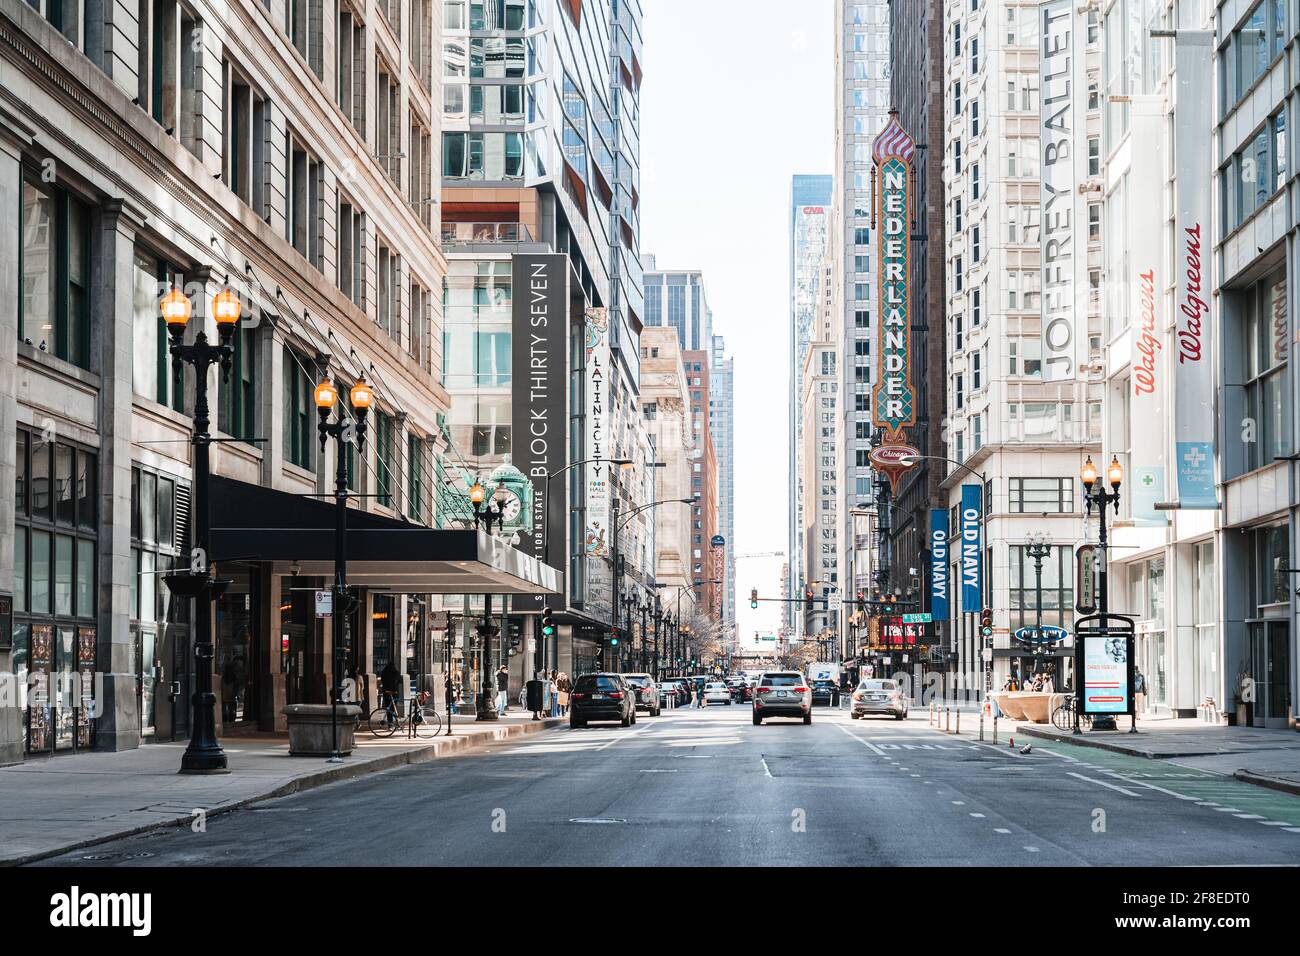 Chicago, Illinois - March 13, 2021: Near Empty Streets of Downtown Chicago During the COVID-19 Pandemic. Stock Photo